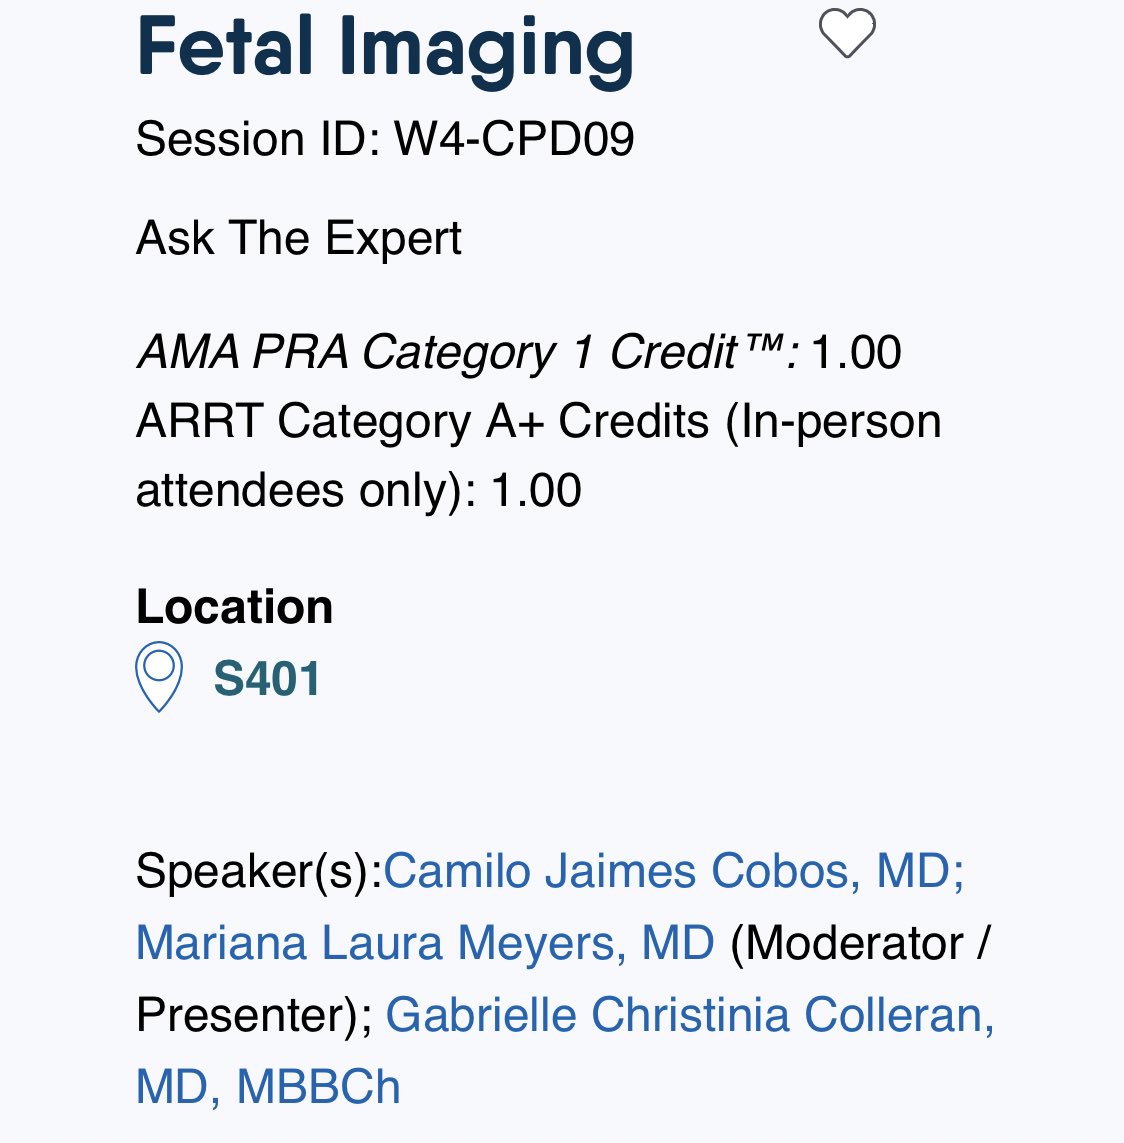 Interested in Fetal Imaging? 

Catch the phenomenal @marianazmeyers as she shares Tips and Tricks of Fetal Imaging at 1.5T.  

1:30p CST S401 #RSNA21 @RSNA 

@PedsRadsColo @ChildrensColo @SocPedRad #fetalimaging @Camilojaimesc